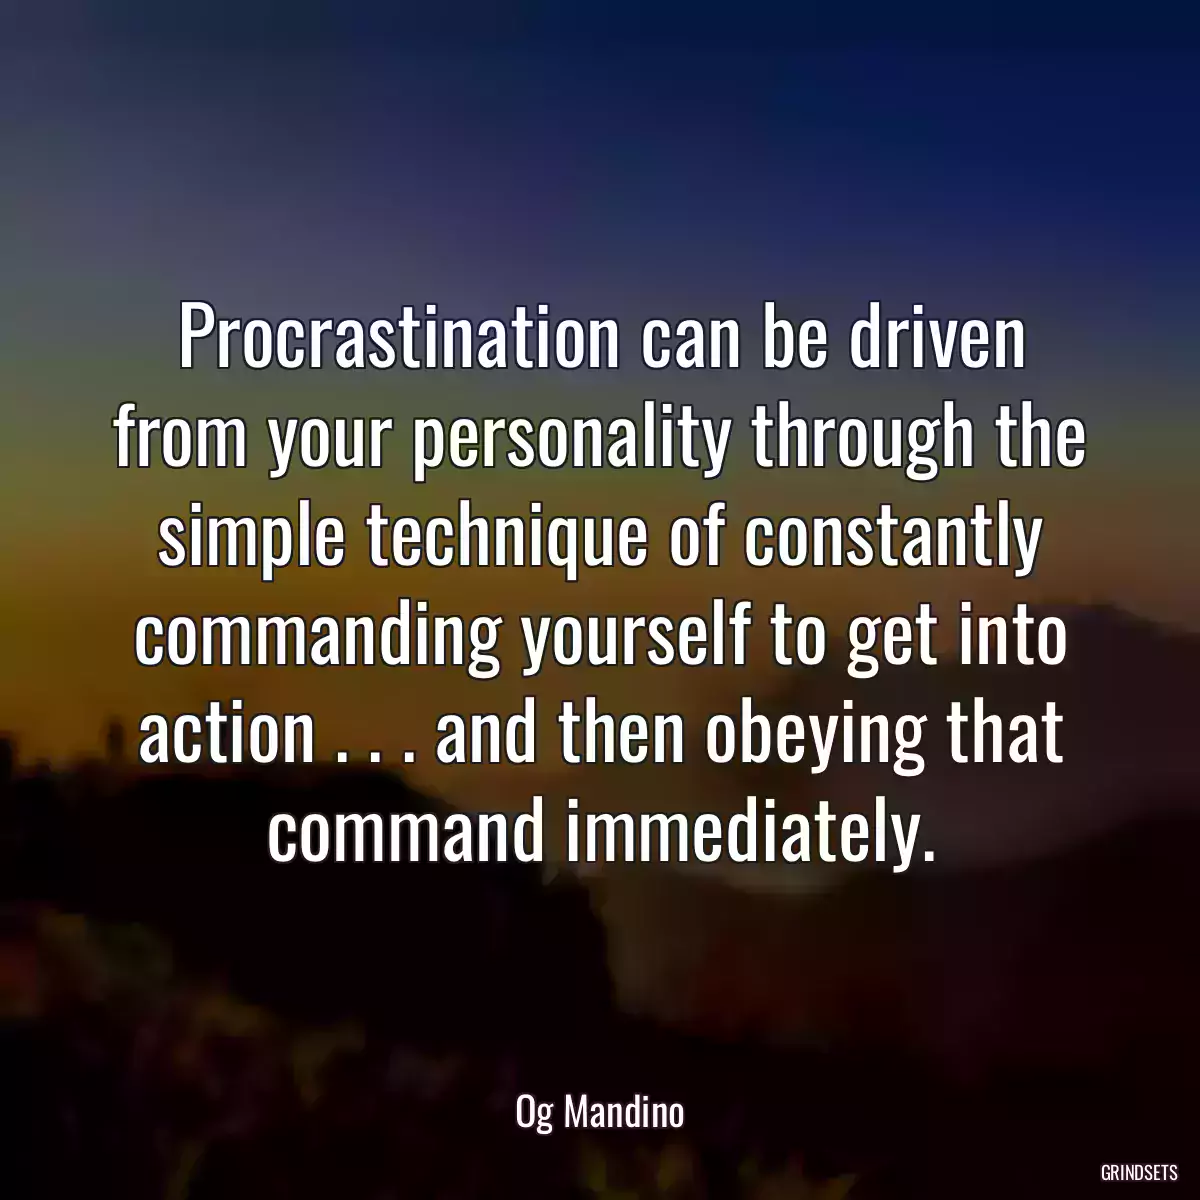 Procrastination can be driven from your personality through the simple technique of constantly commanding yourself to get into action . . . and then obeying that command immediately.